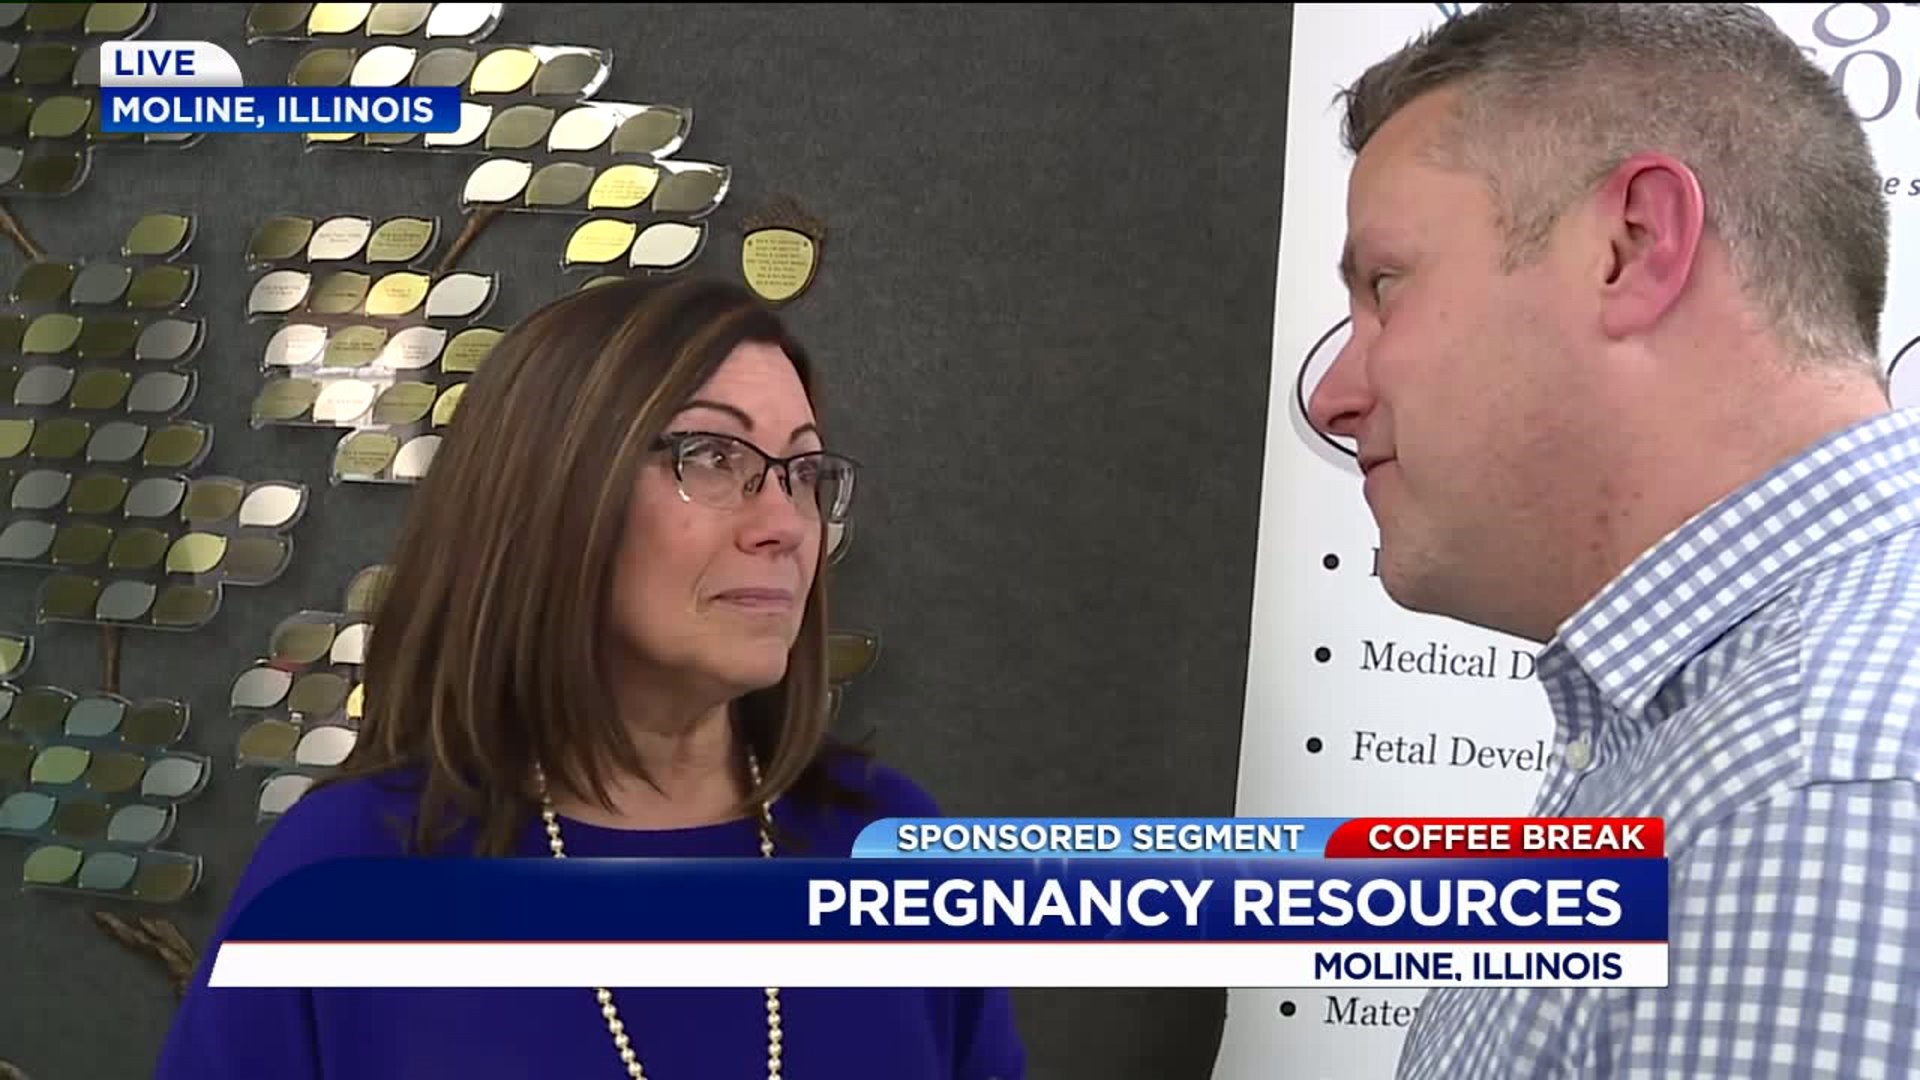 Coffee Break: Eric chats with leaders at Pregnancy Resources